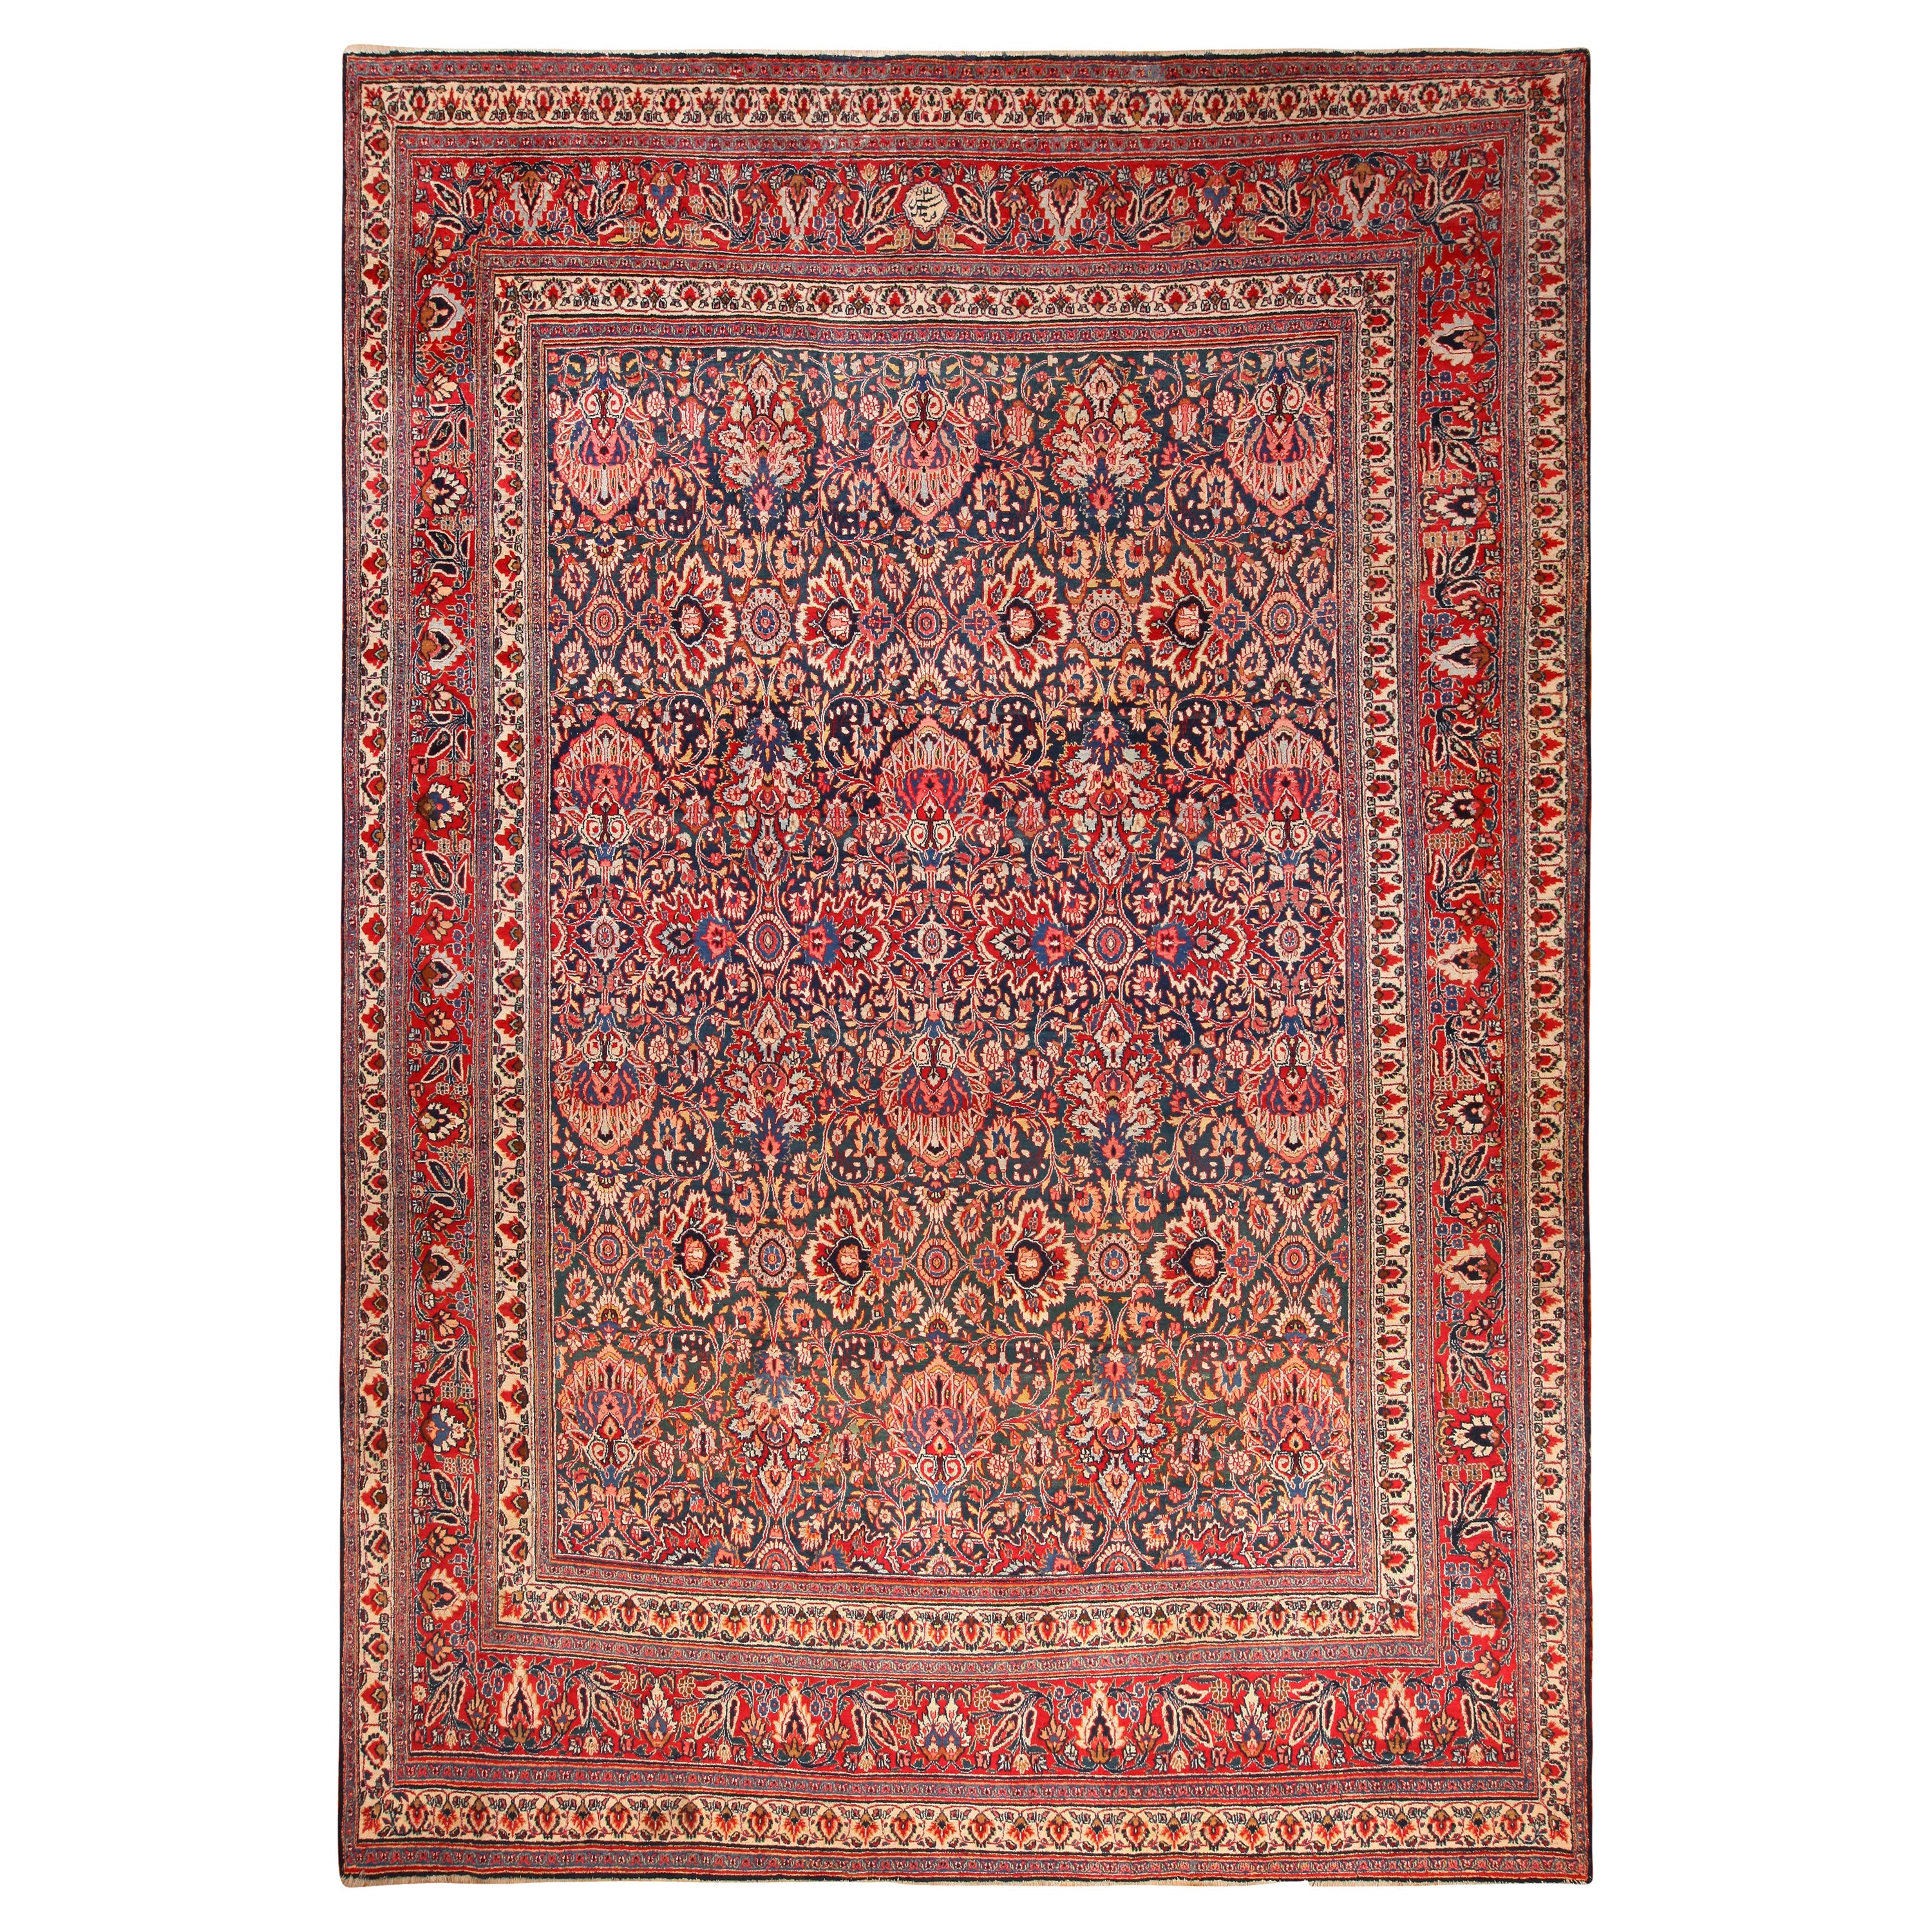 Large Antique Persian Khorassan Rug. 11 ft 10 in x 17 ft